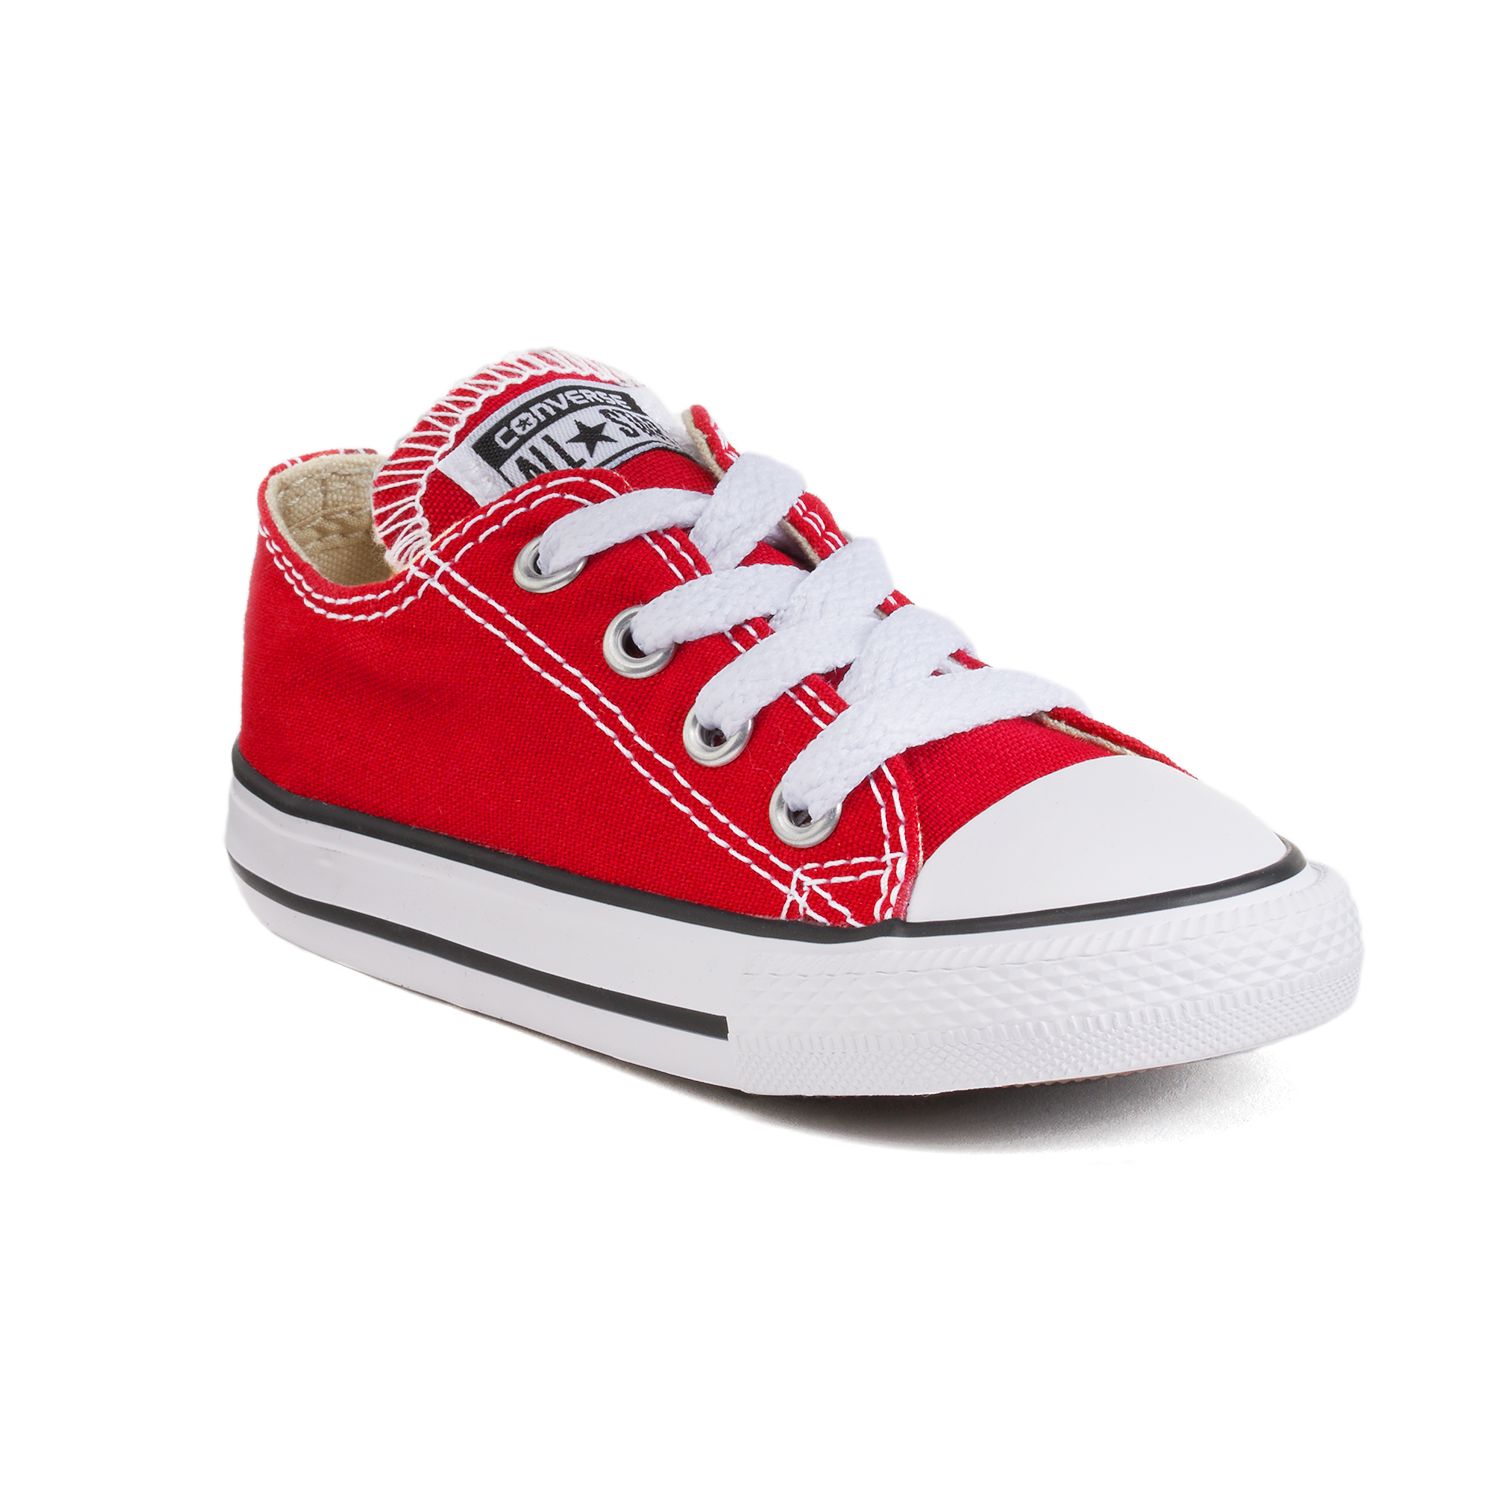 baby girl red converse